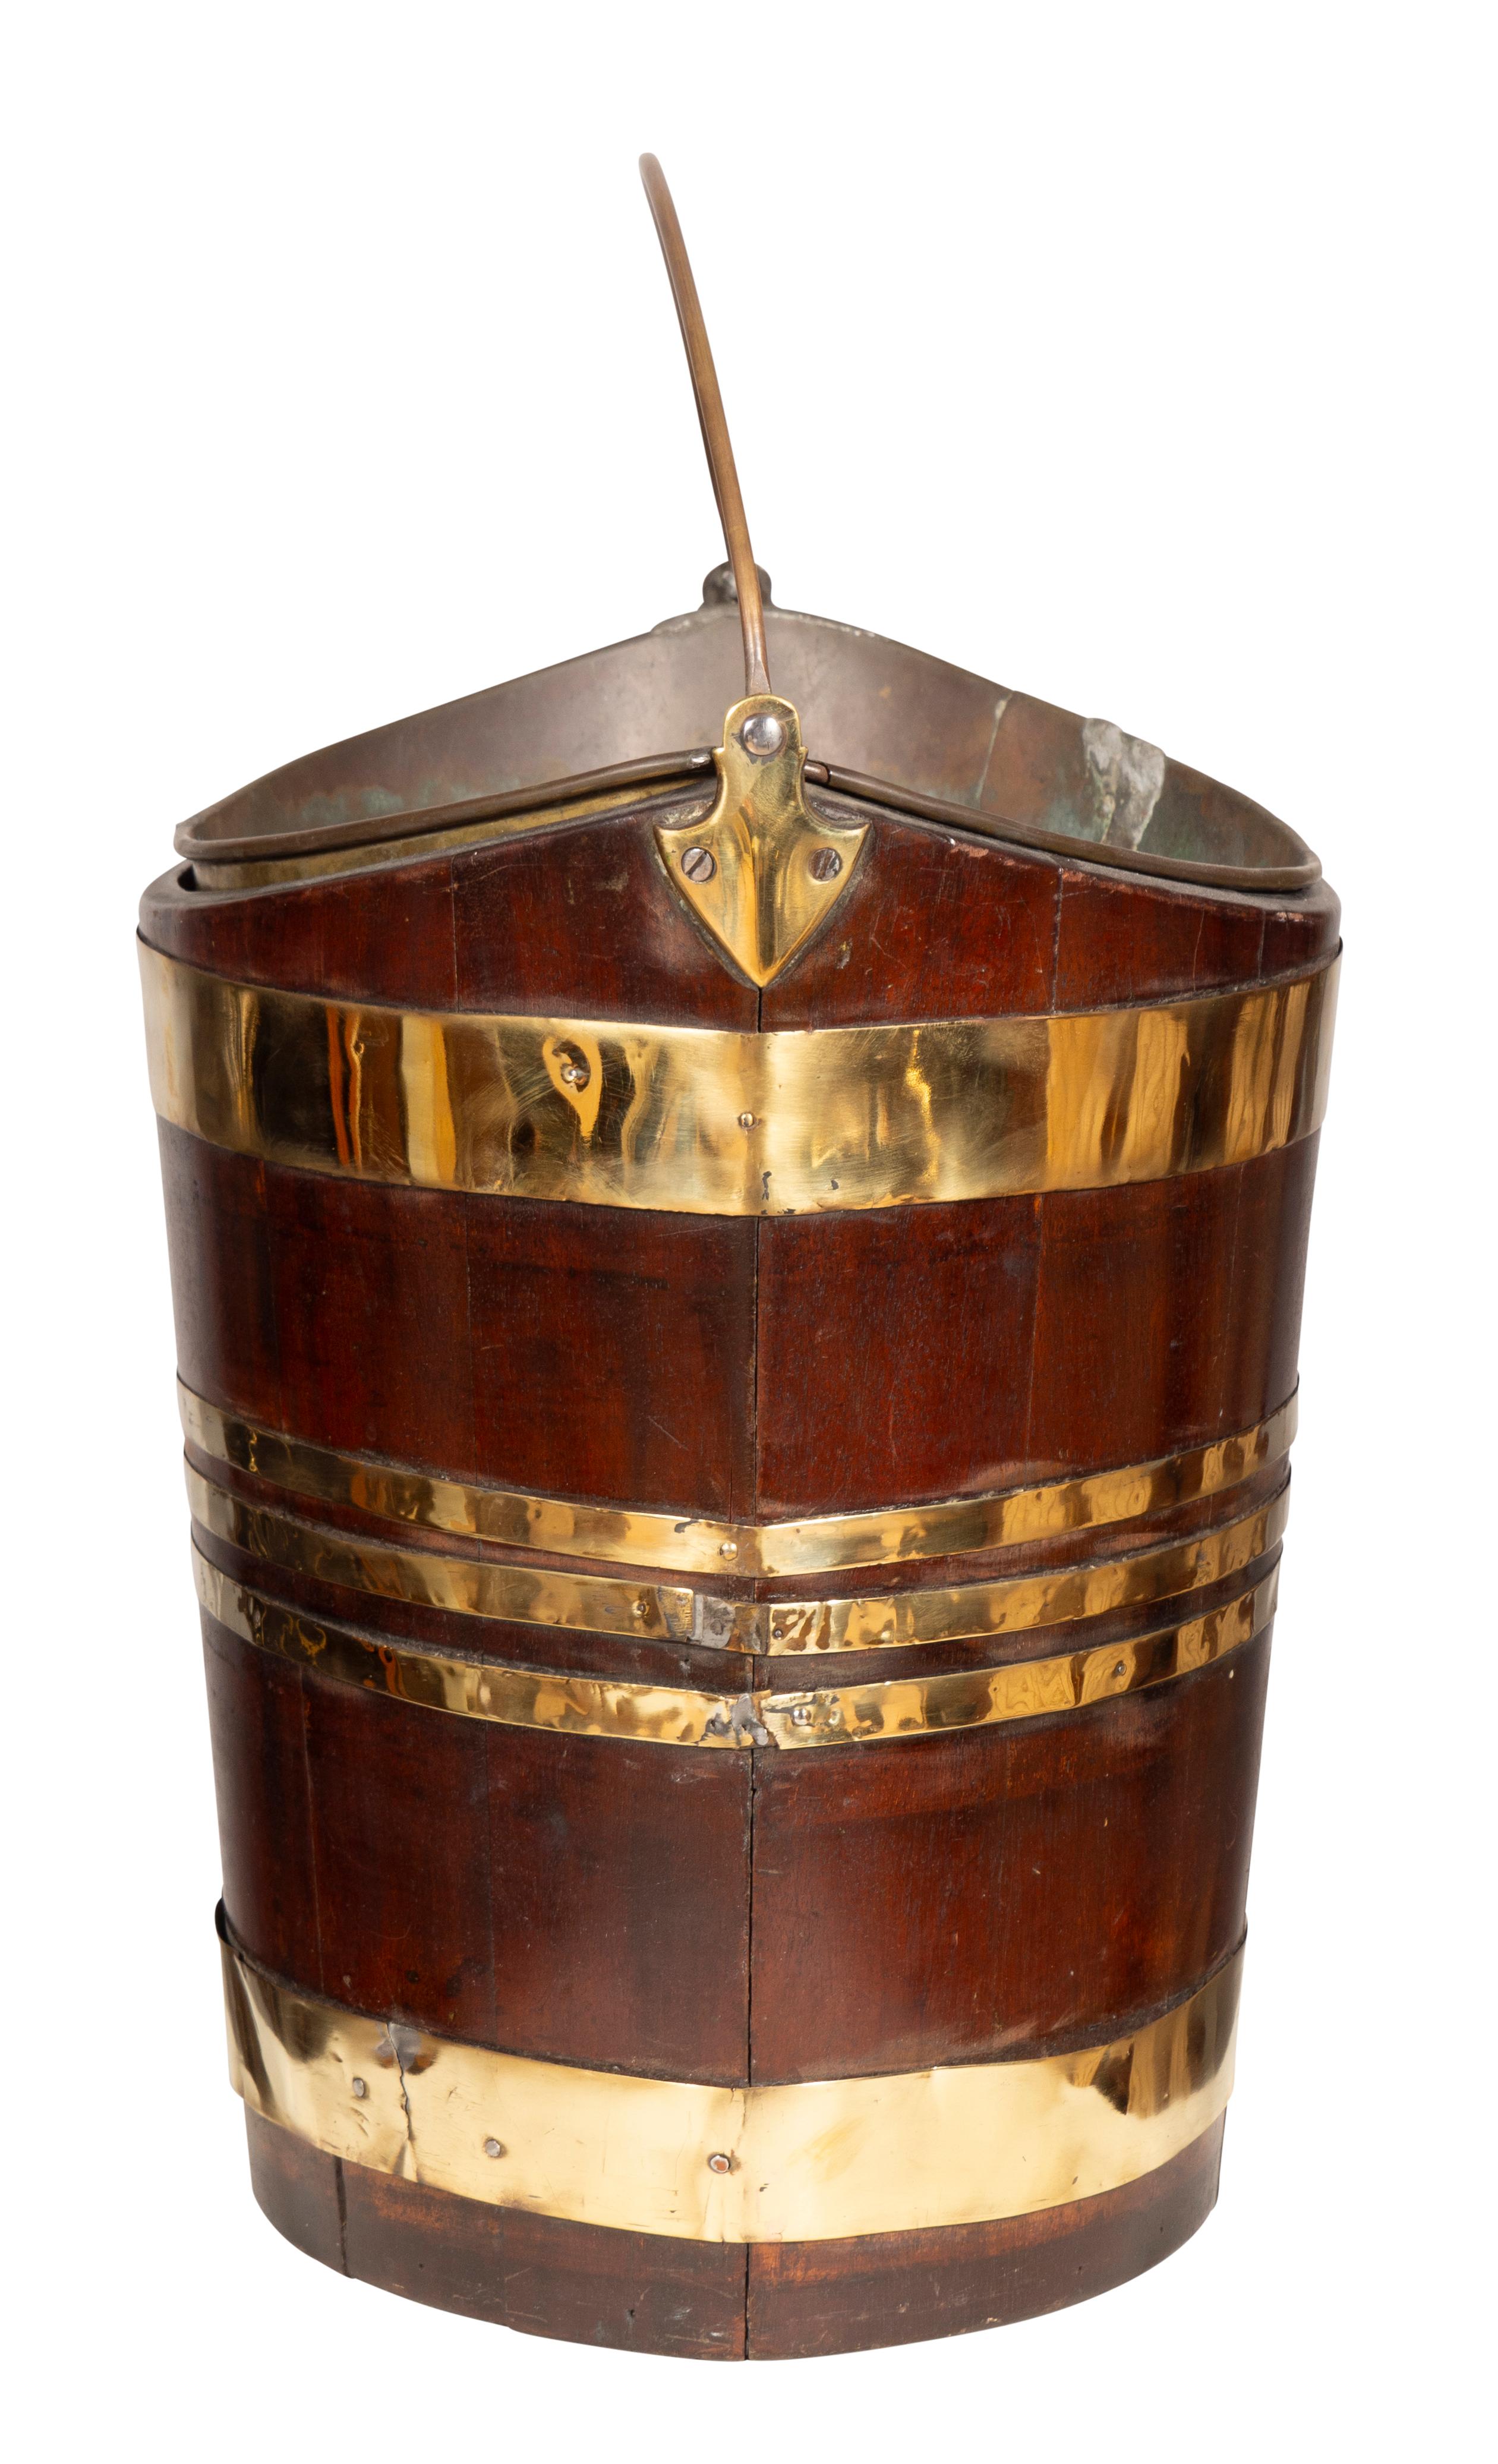 European Regency Mahogany And Brass Bound Peat Bucket For Sale